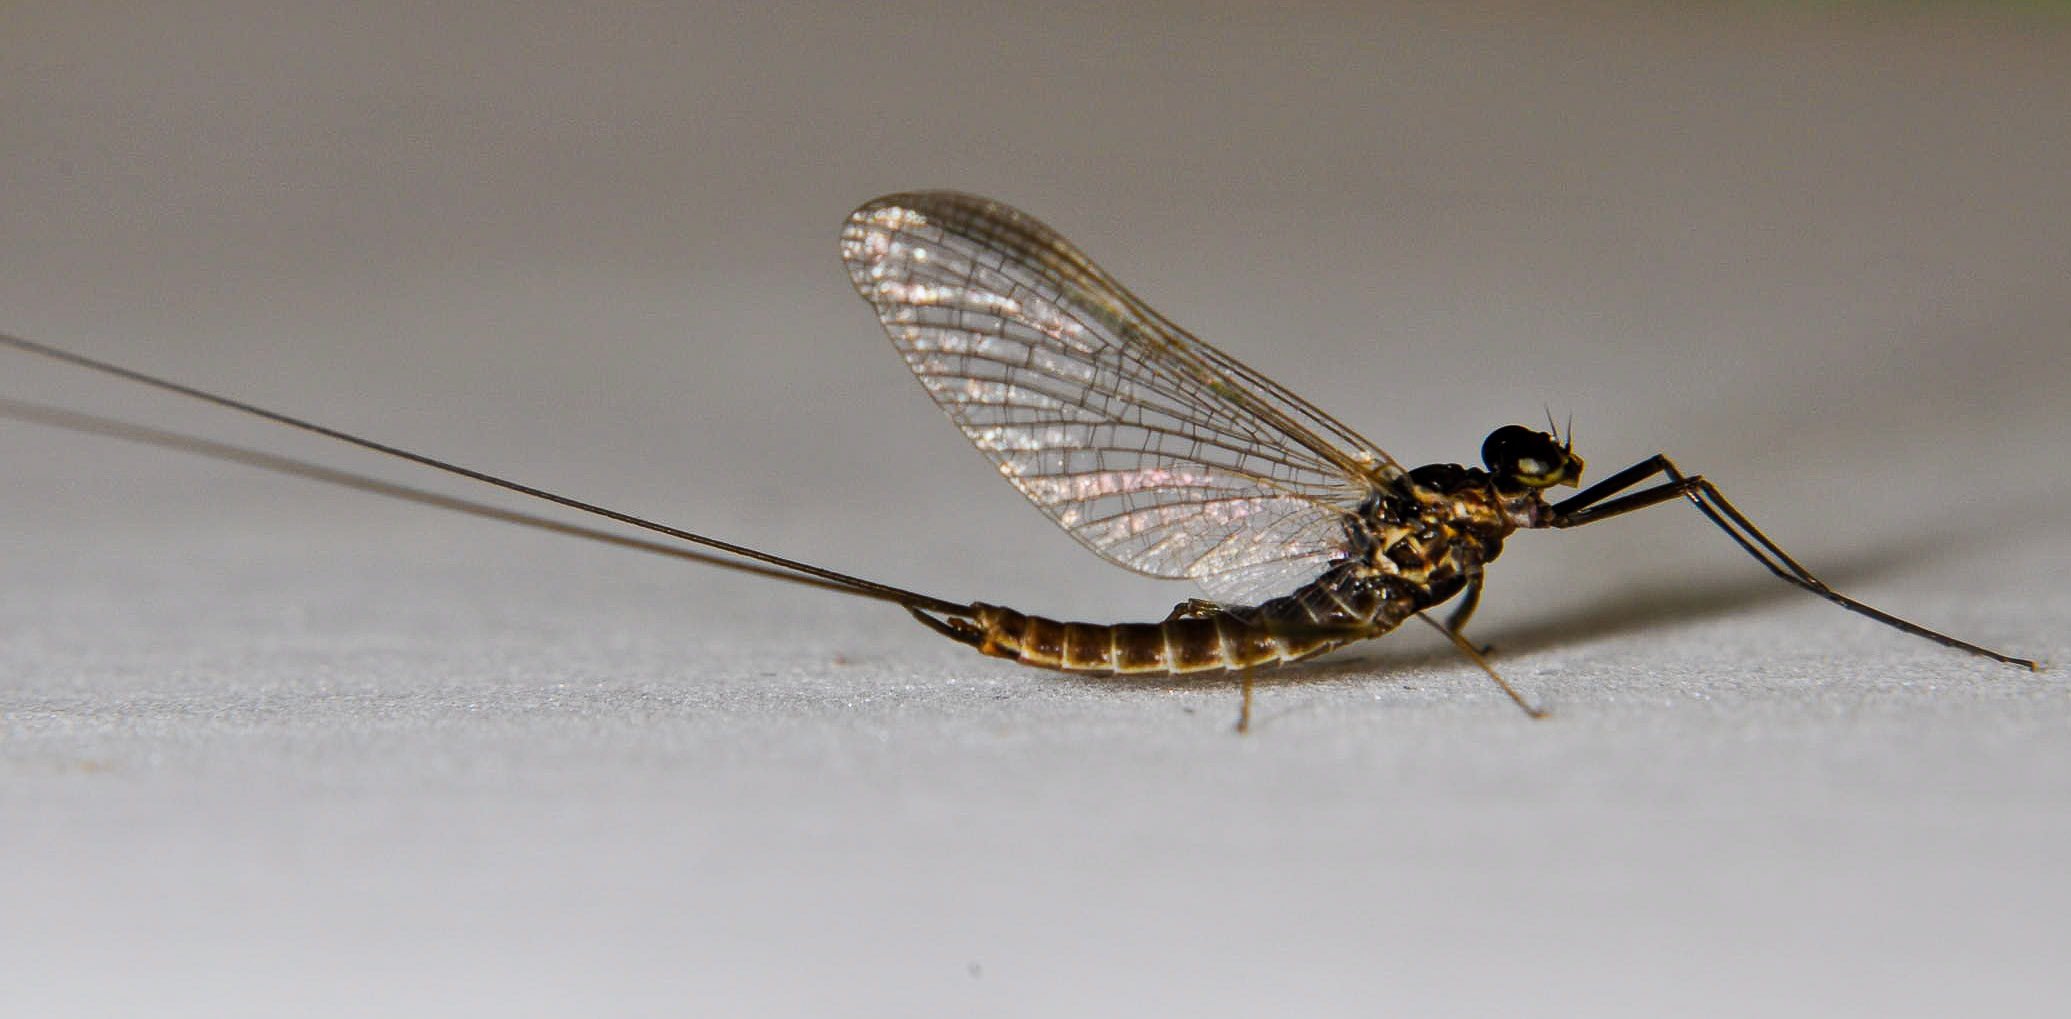 Male Rhithrogena morrisoni (Western March Brown) Mayfly Adult from the Touchet River in Washington